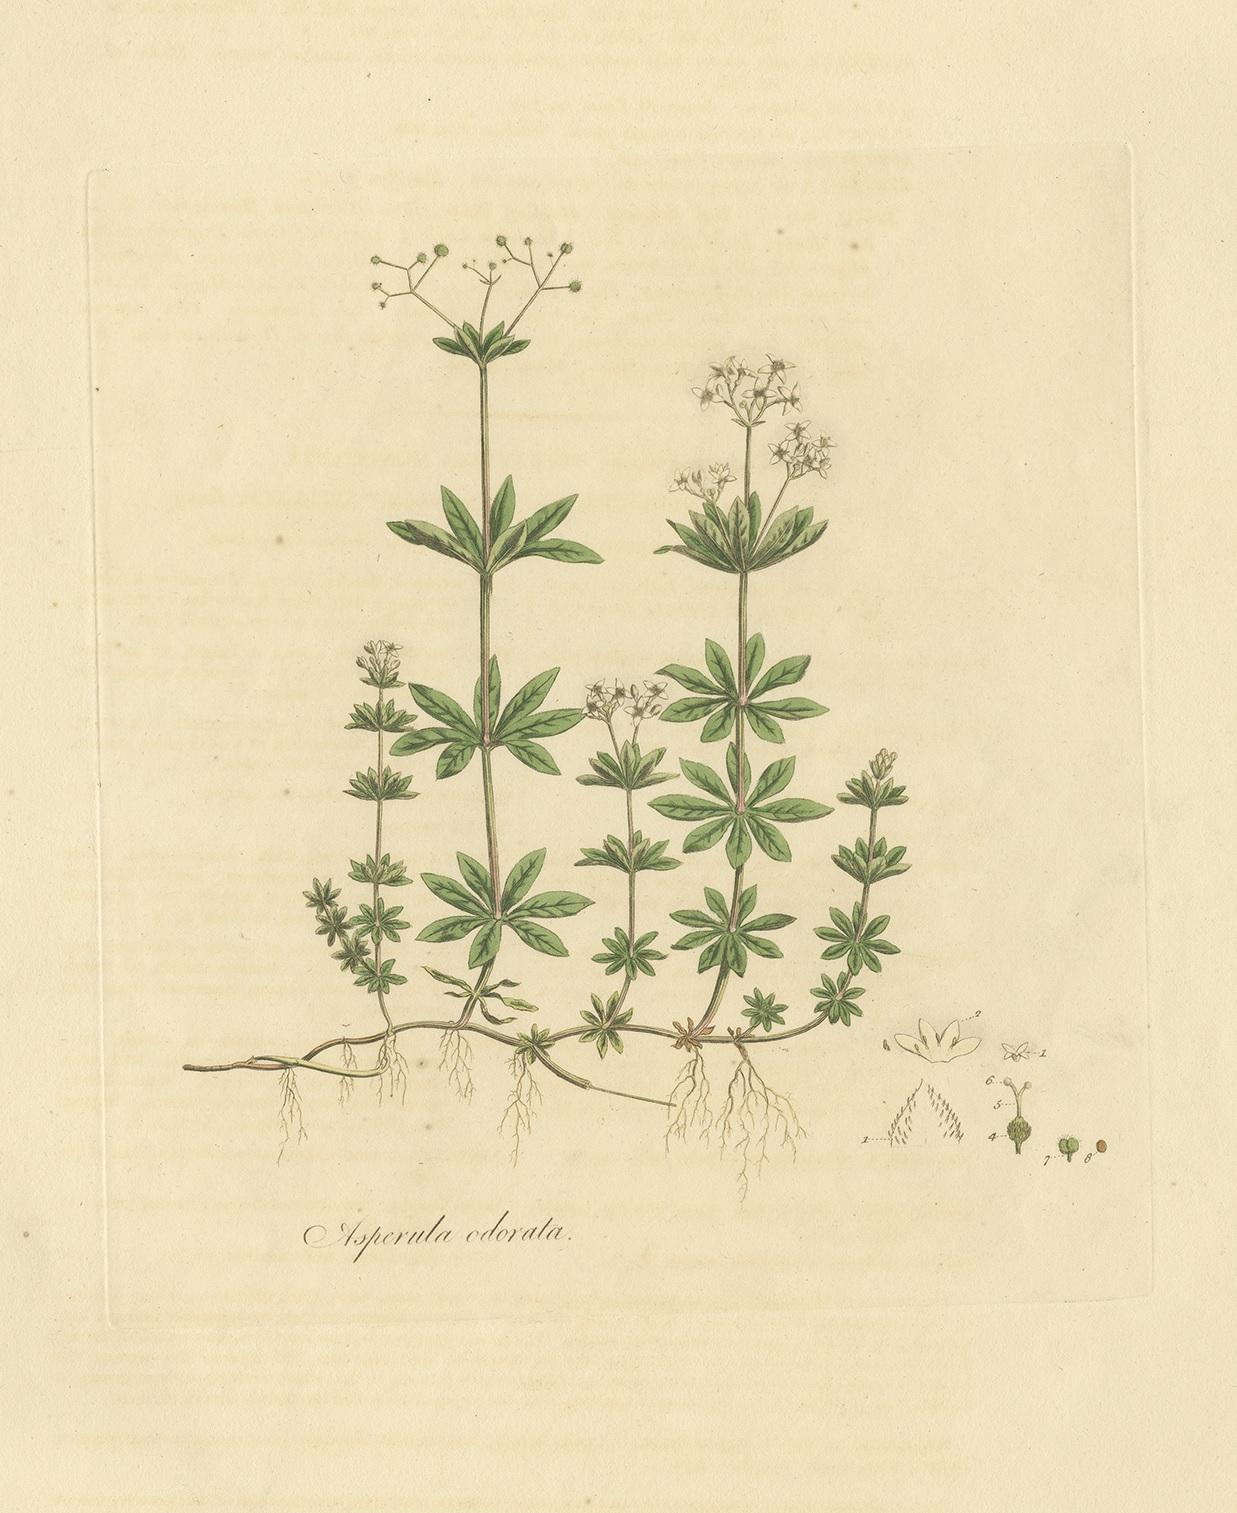 Antique botany print titled 'Asperula Odorata'. Hand colored engraving of galium odoratum, also known as sweet-scented bedstraw. This print originates from 'Flora Londinensis' by William Curtis.